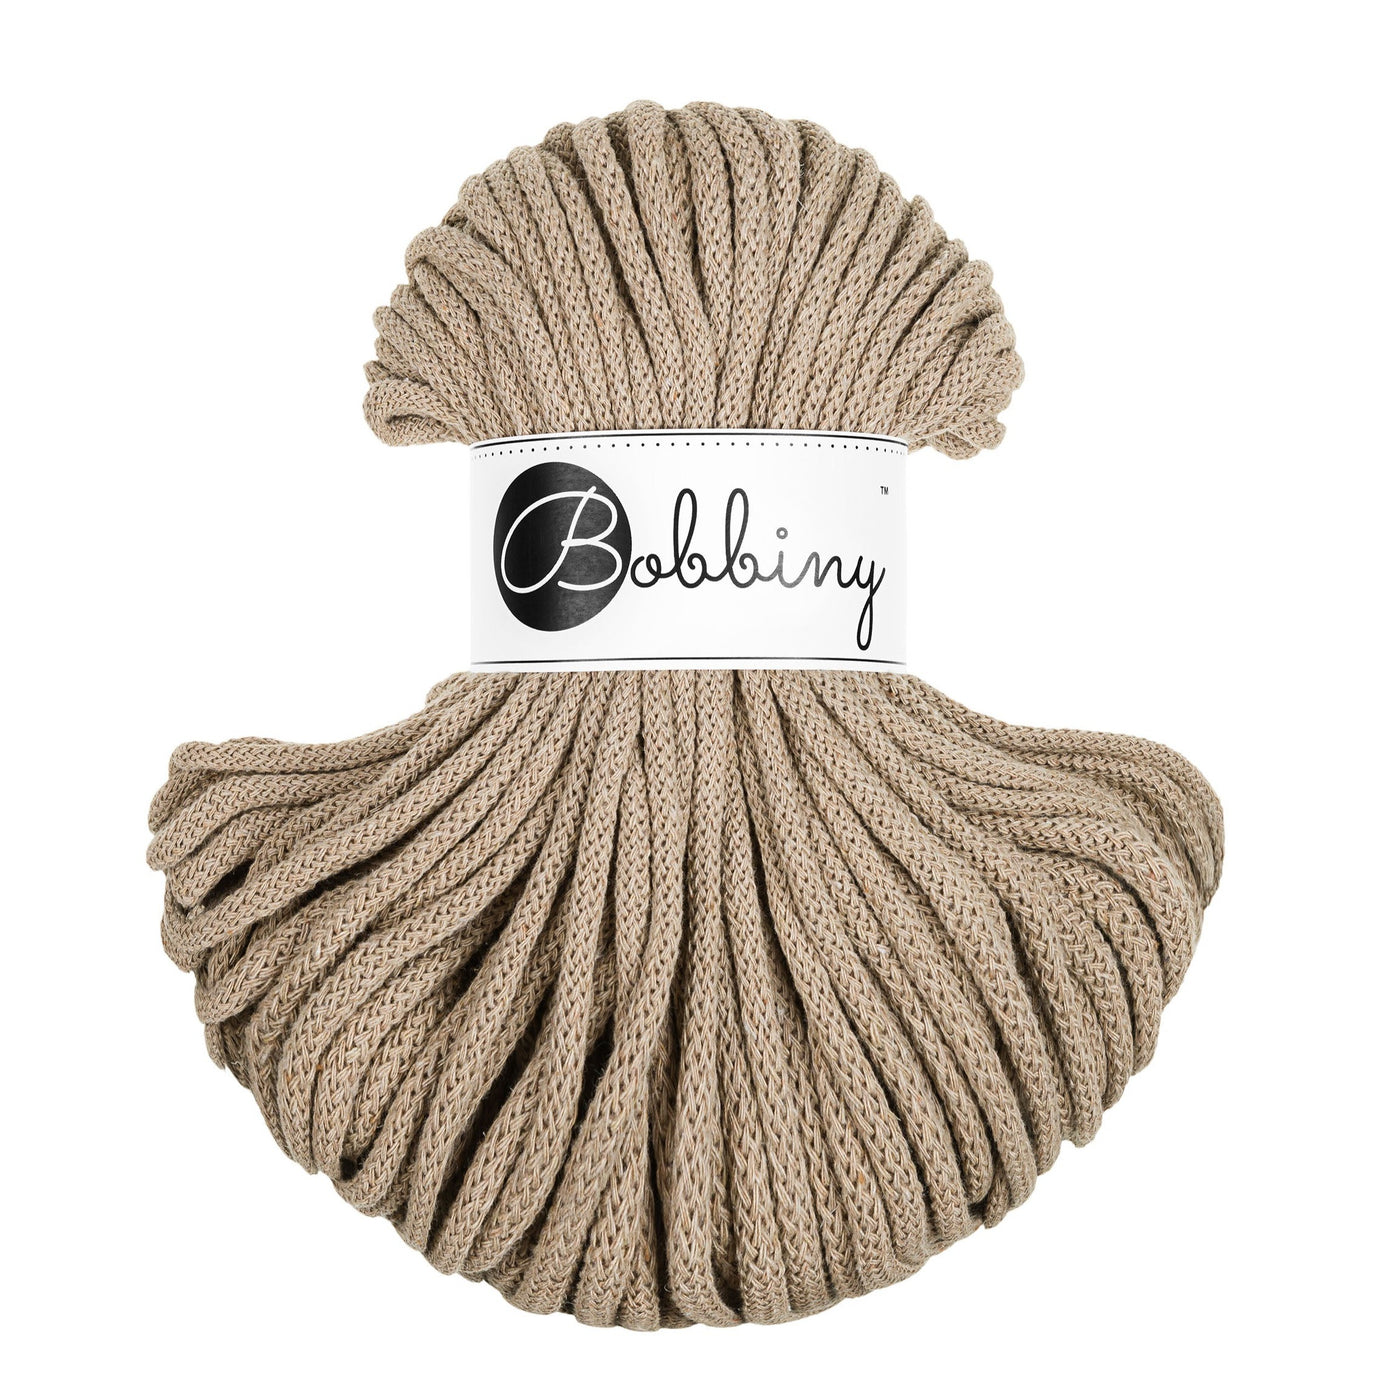 Bobbiny braided cord 5mm 50m in sand shade